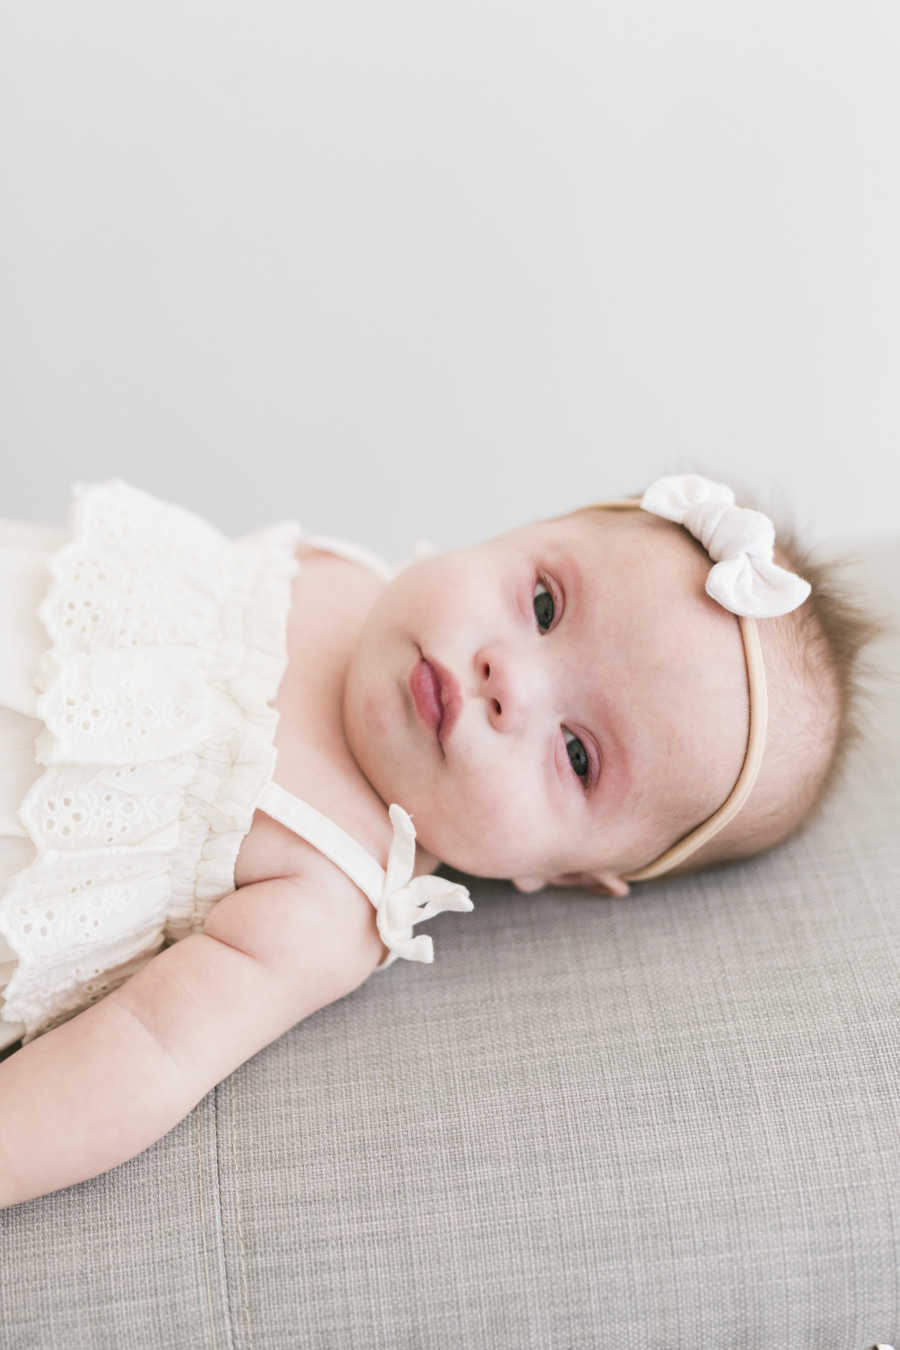 Newborn with down syndrome lay son back wearing white bow and dress